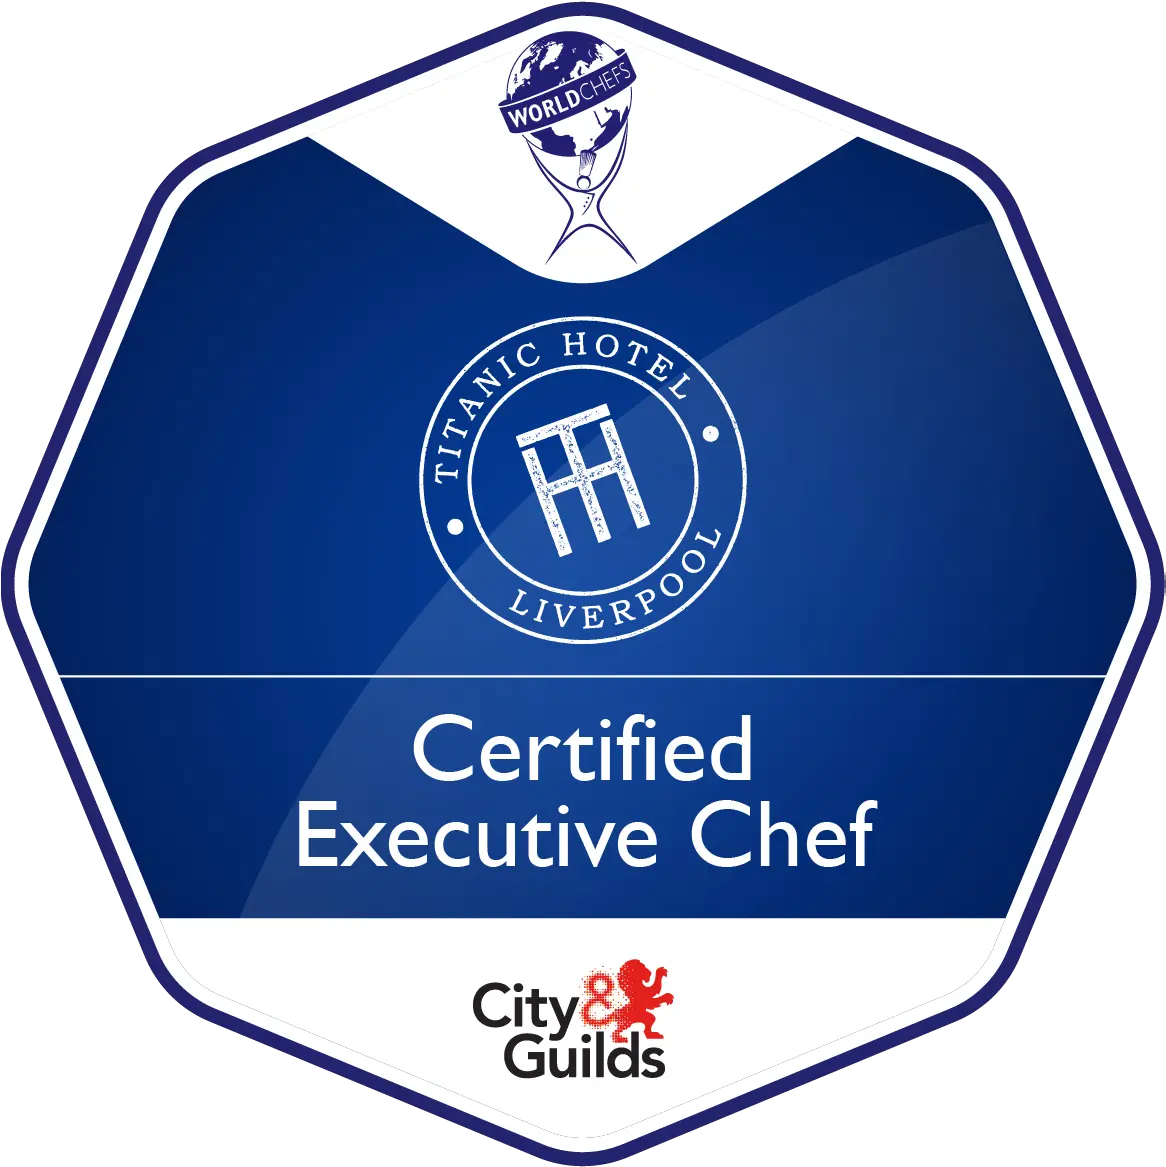 Worldchefs Certified Executive Chef Titanic Liverpool Emblem Png Titanic Png